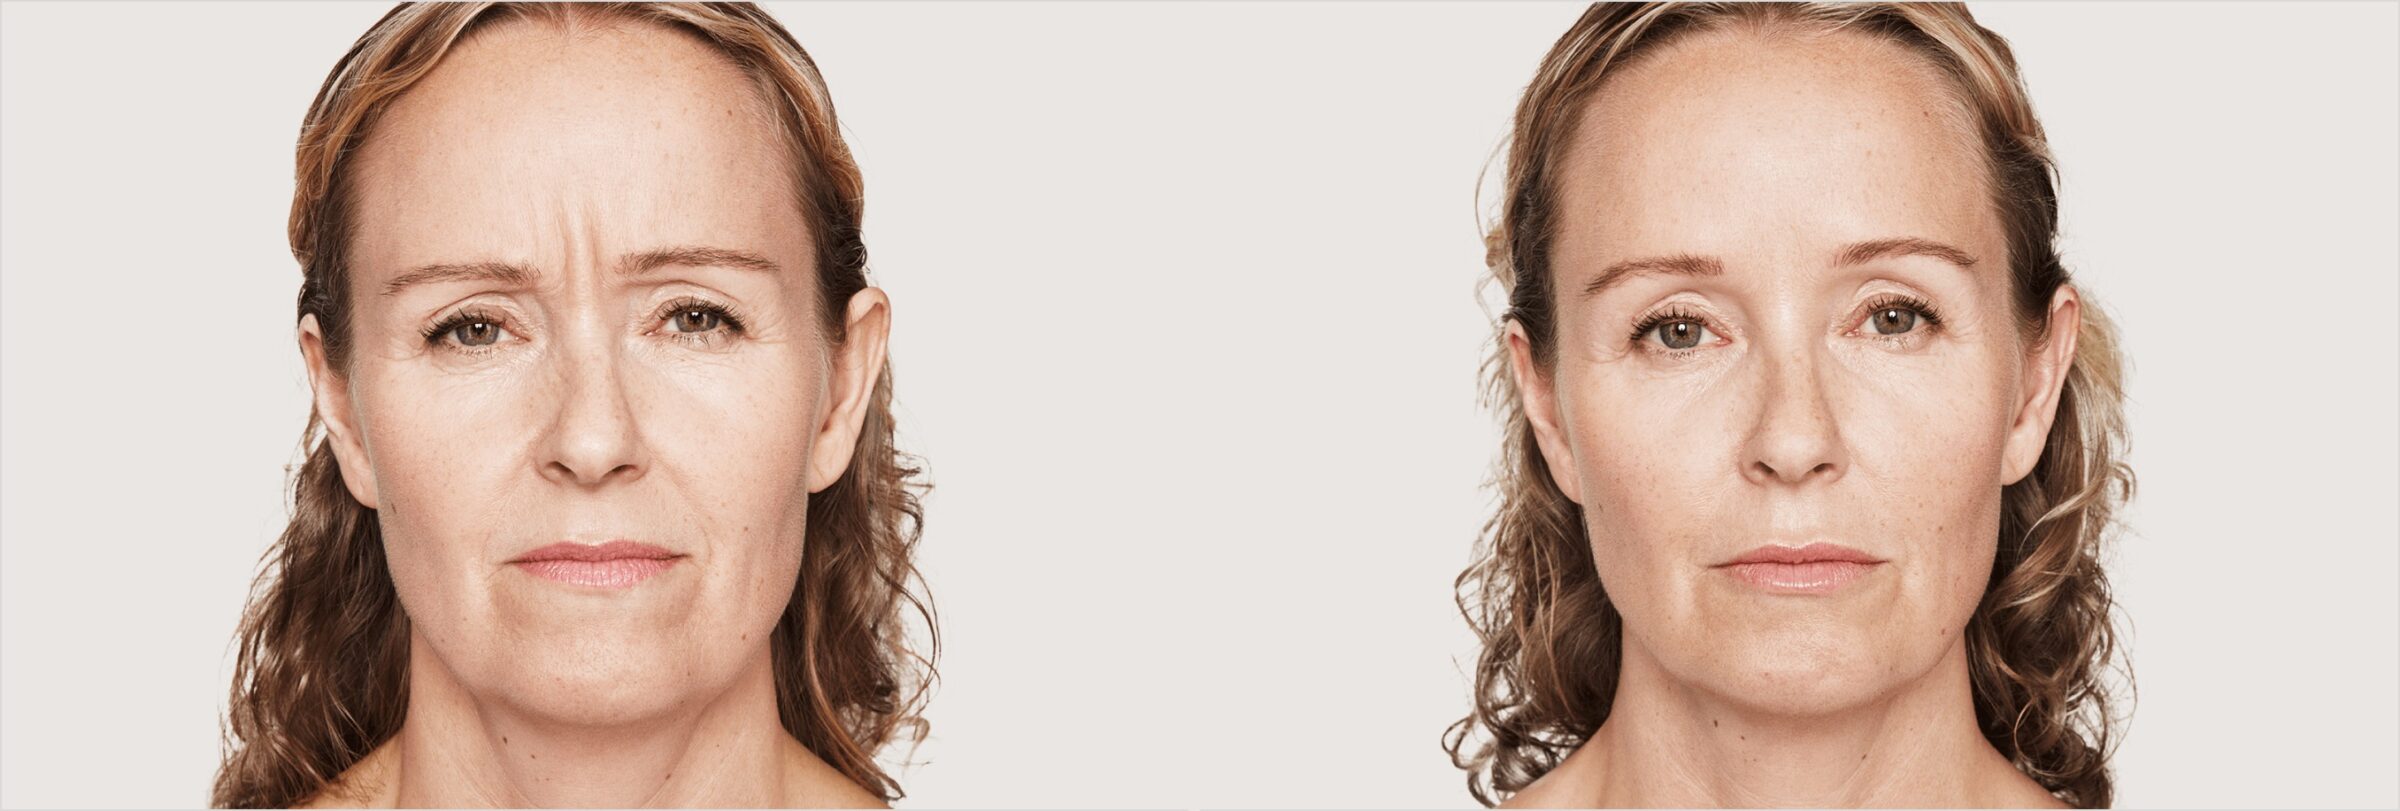 Before & after results of dysport on face